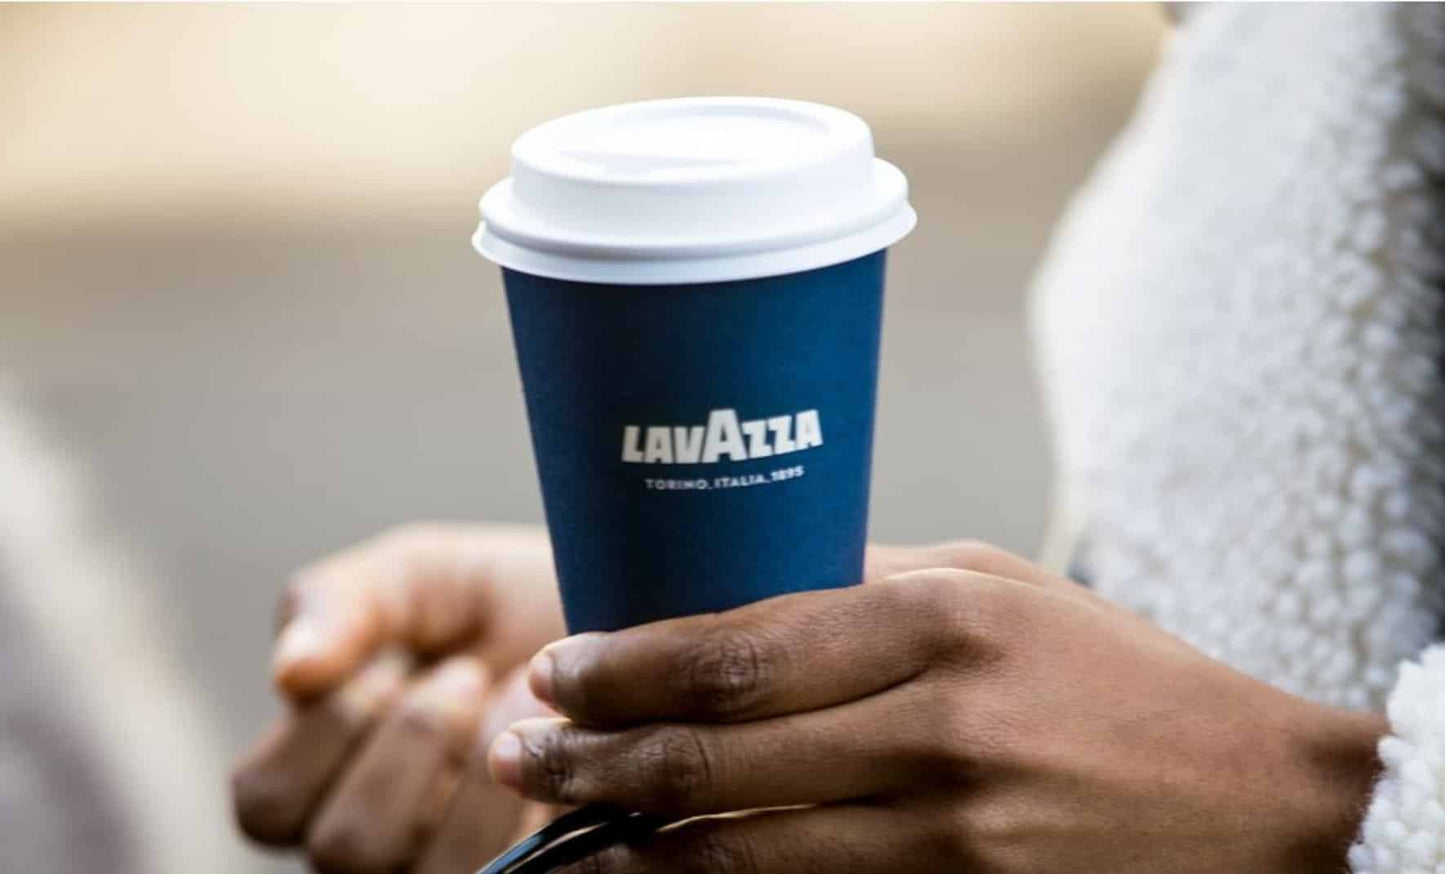 Lavazza 8oz Blue & White Double Walled Cups 25's